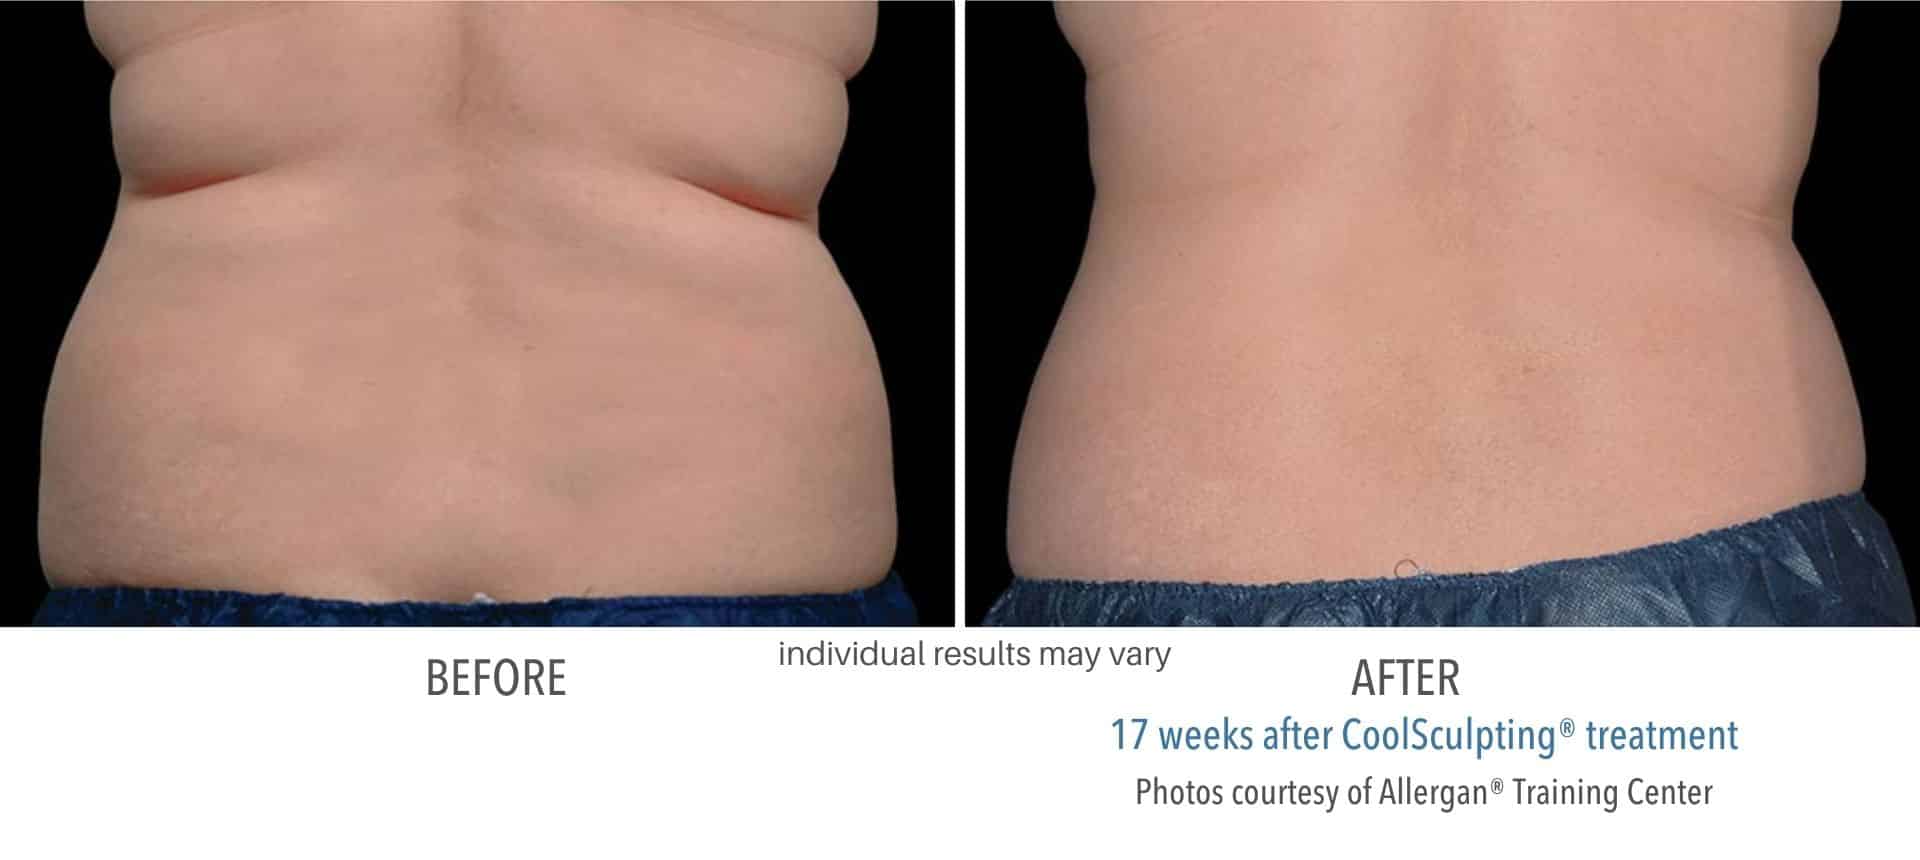 Coolsculpting lower back before and after results.